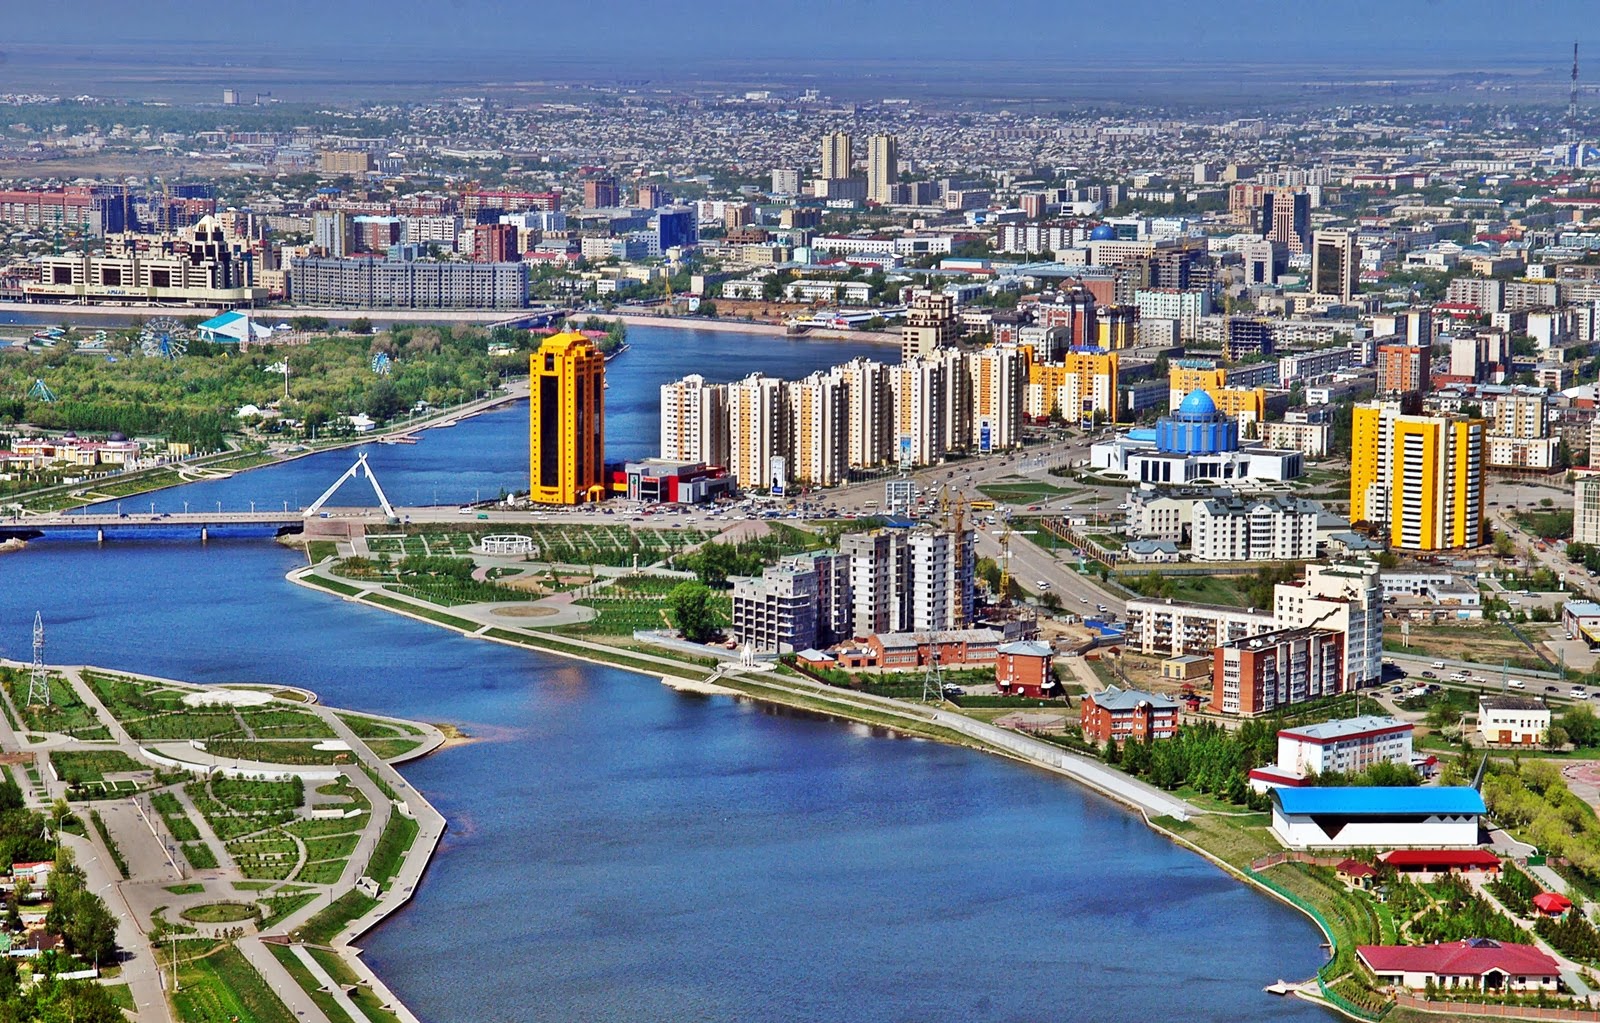 AFTER WHOM KAZAKHSTAN HAS NAMED THE MAIN STREETS OF THE COUNTRY. PART 2